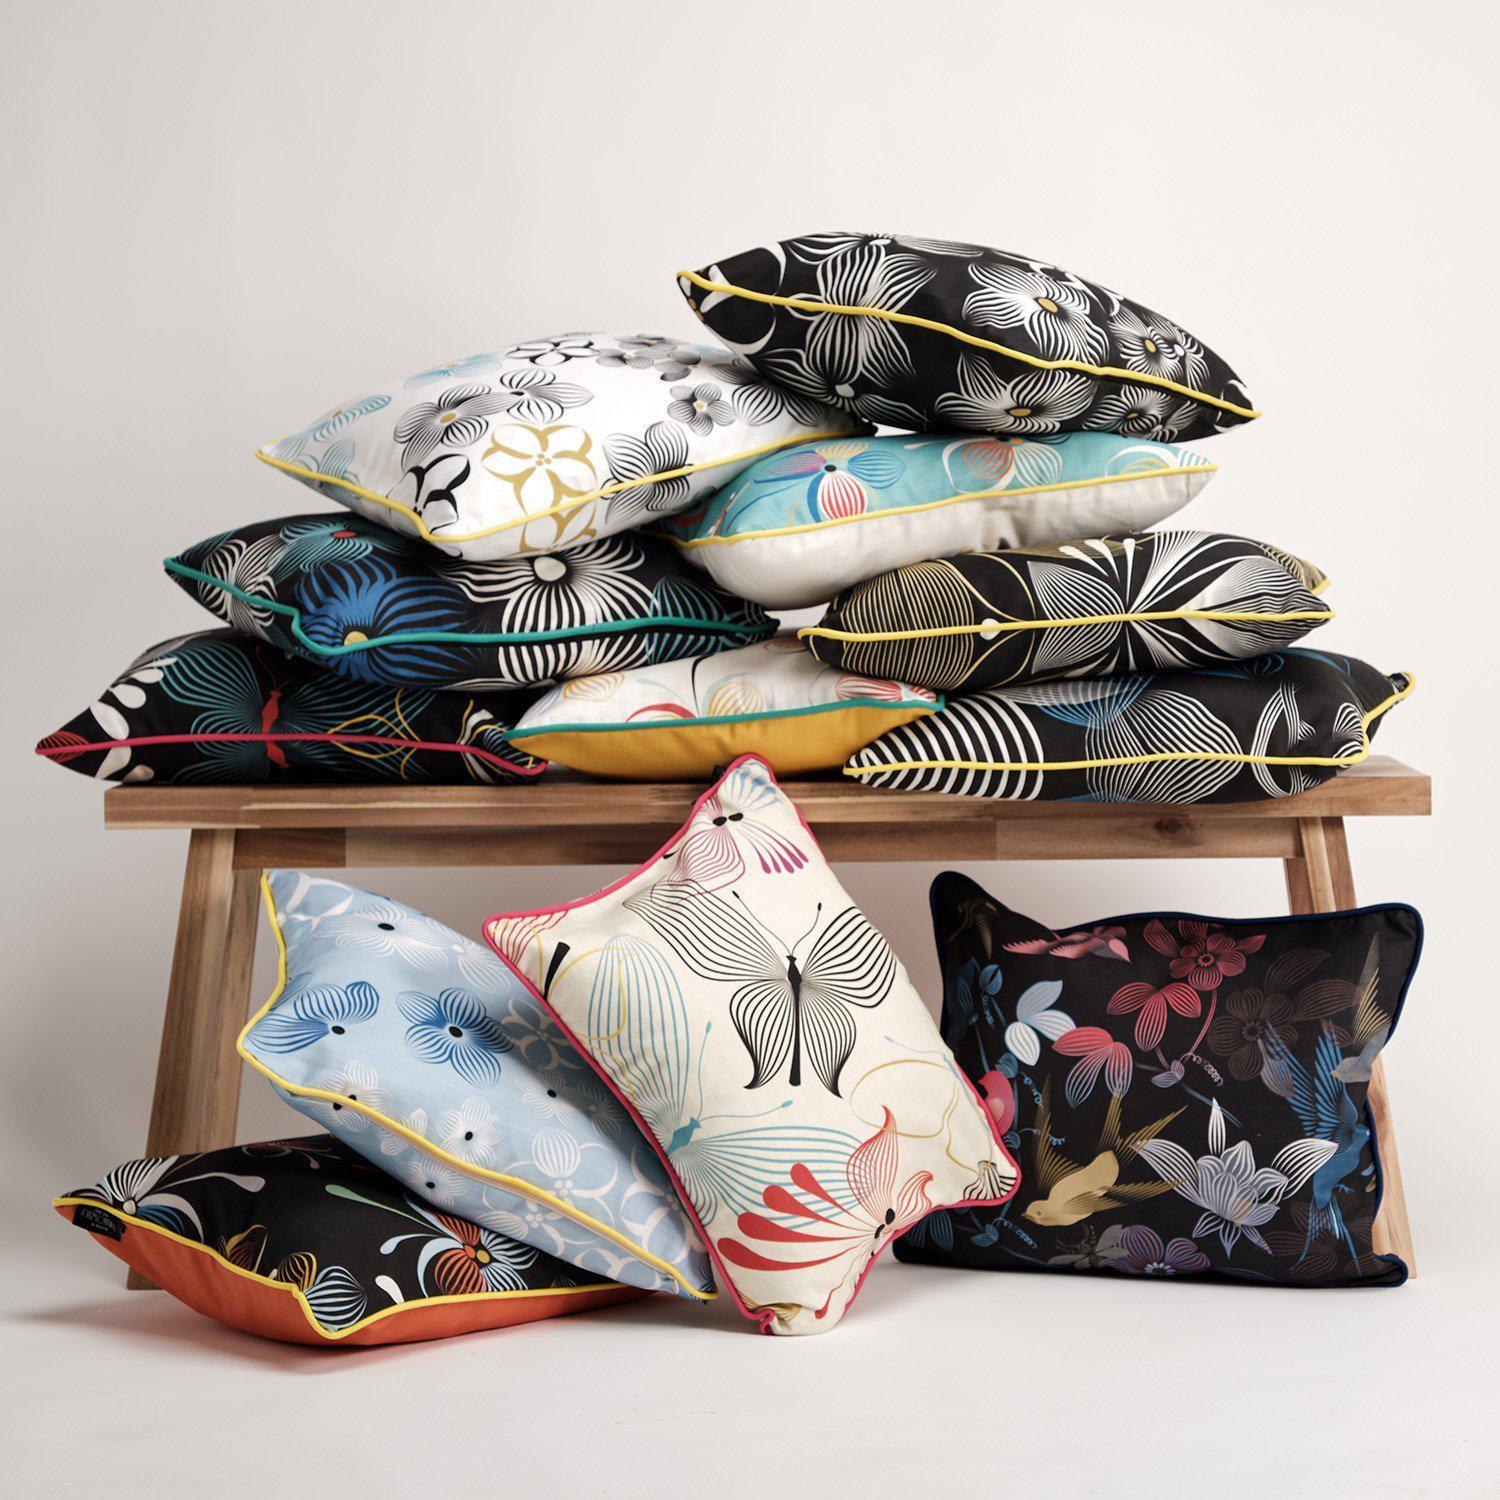 Exotic Butterflies ( White) - Funky Art Cushion - Perfect Day - House Of Turnowsky Pillows - Handmade Cushions UK - WeLoveCushions